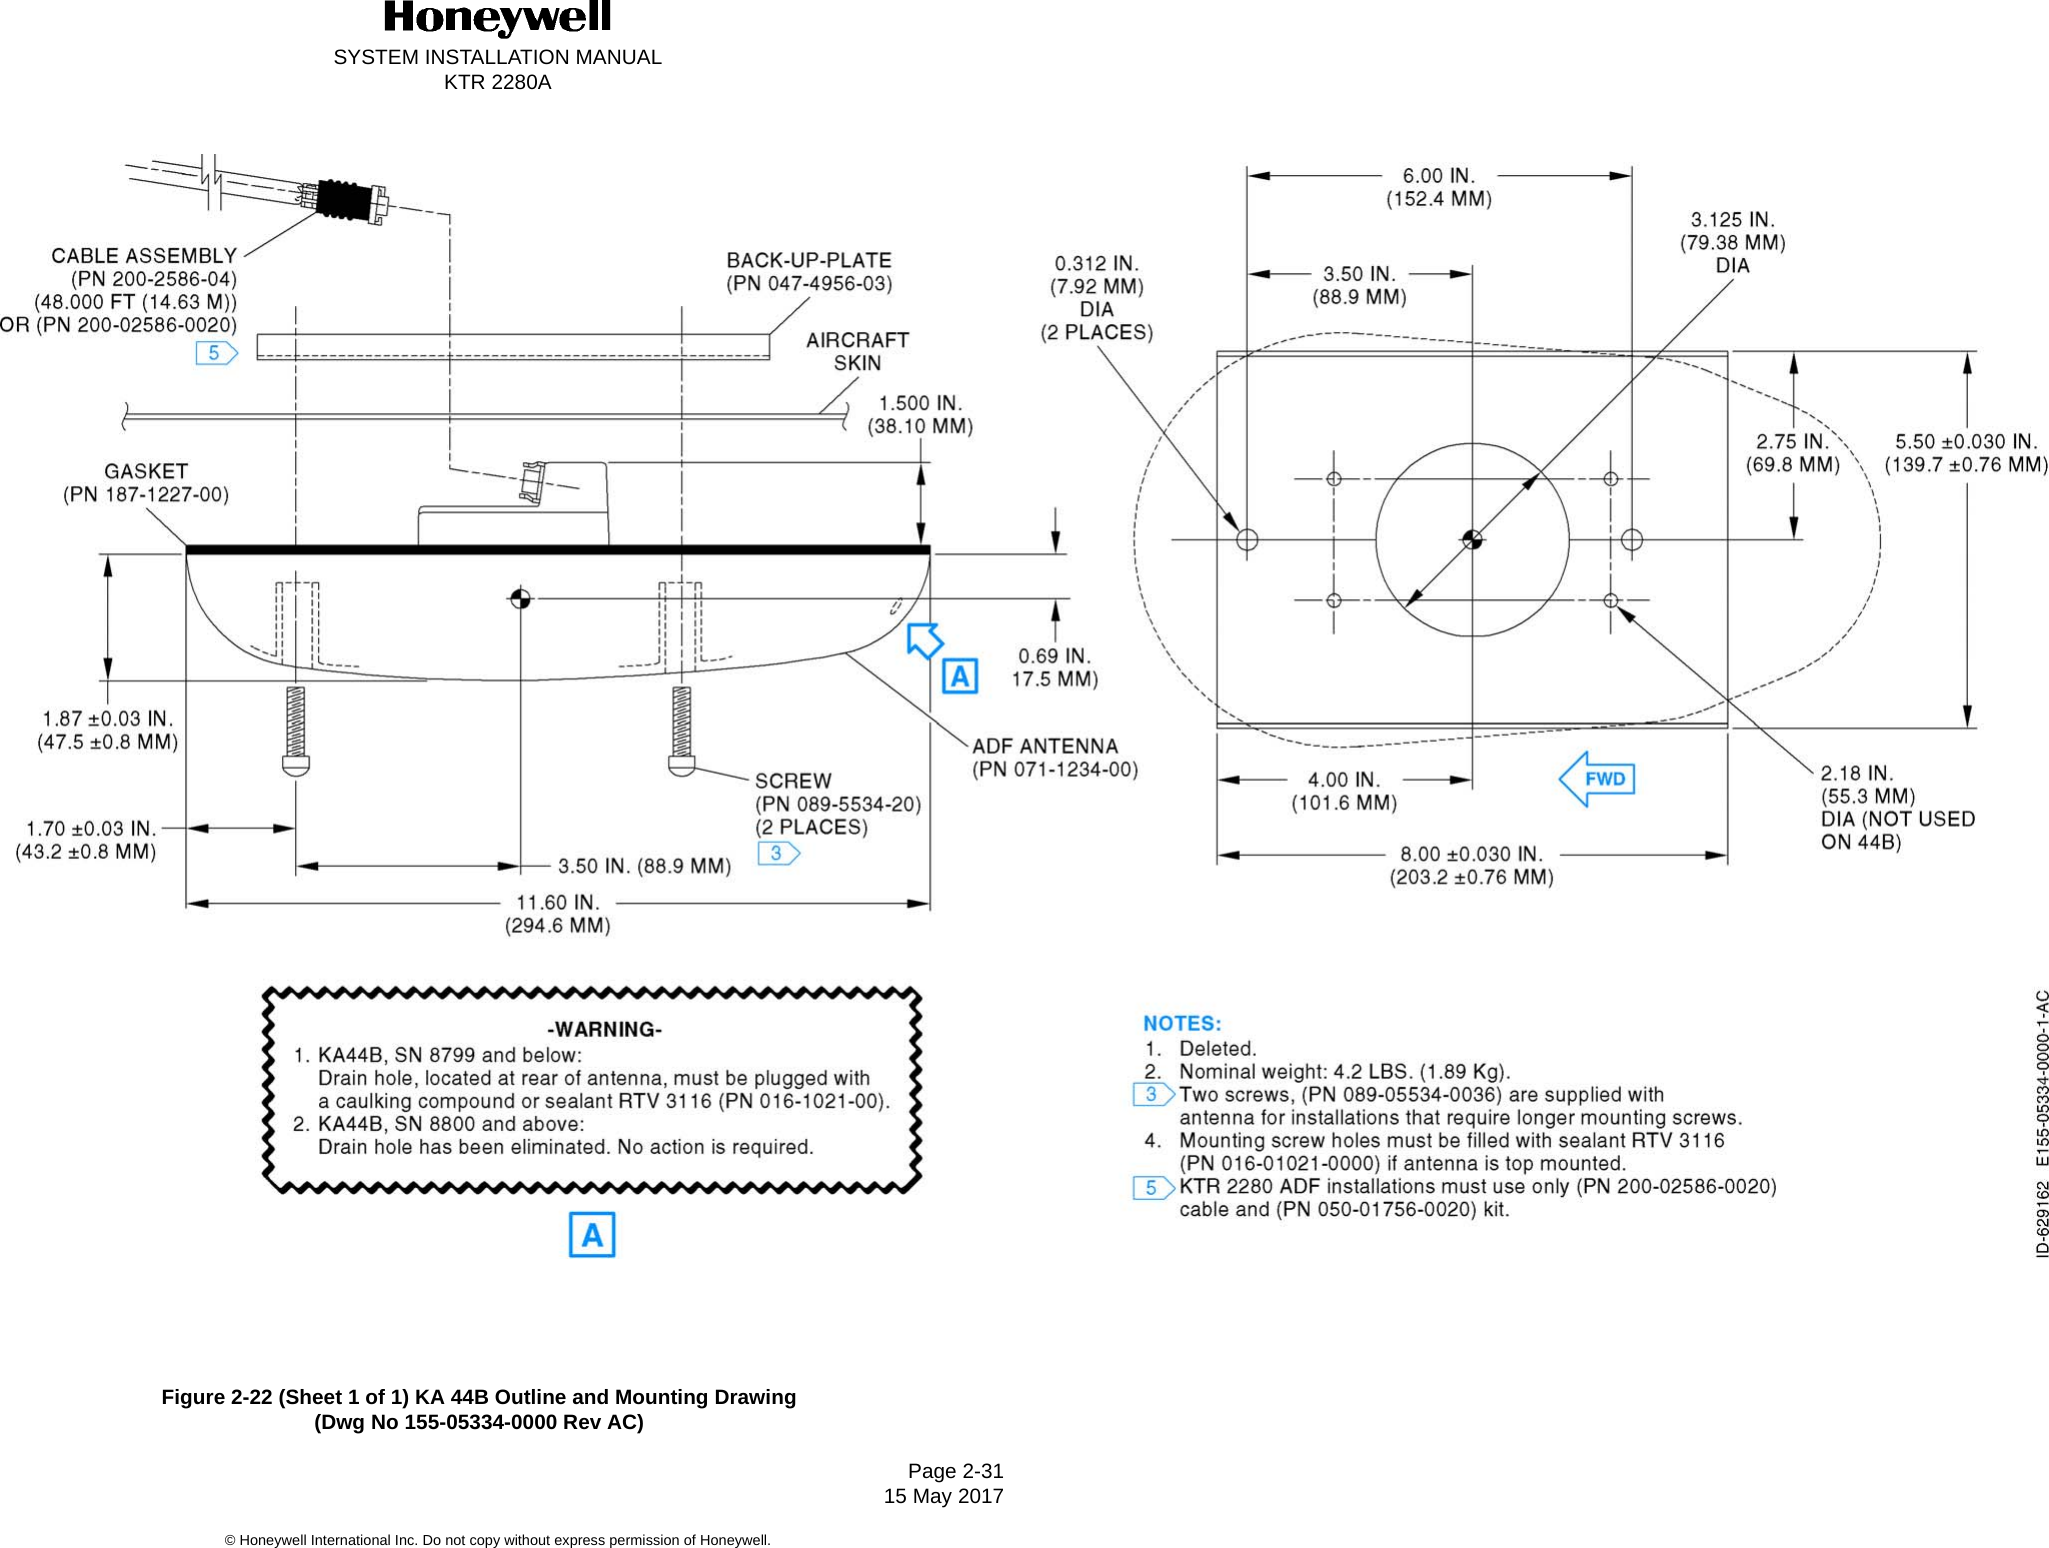 SYSTEM INSTALLATION MANUALKTR 2280APage 2-31 15 May 2017© Honeywell International Inc. Do not copy without express permission of Honeywell.Figure 2-22 (Sheet 1 of 1) KA 44B Outline and Mounting Drawing(Dwg No 155-05334-0000 Rev AC)